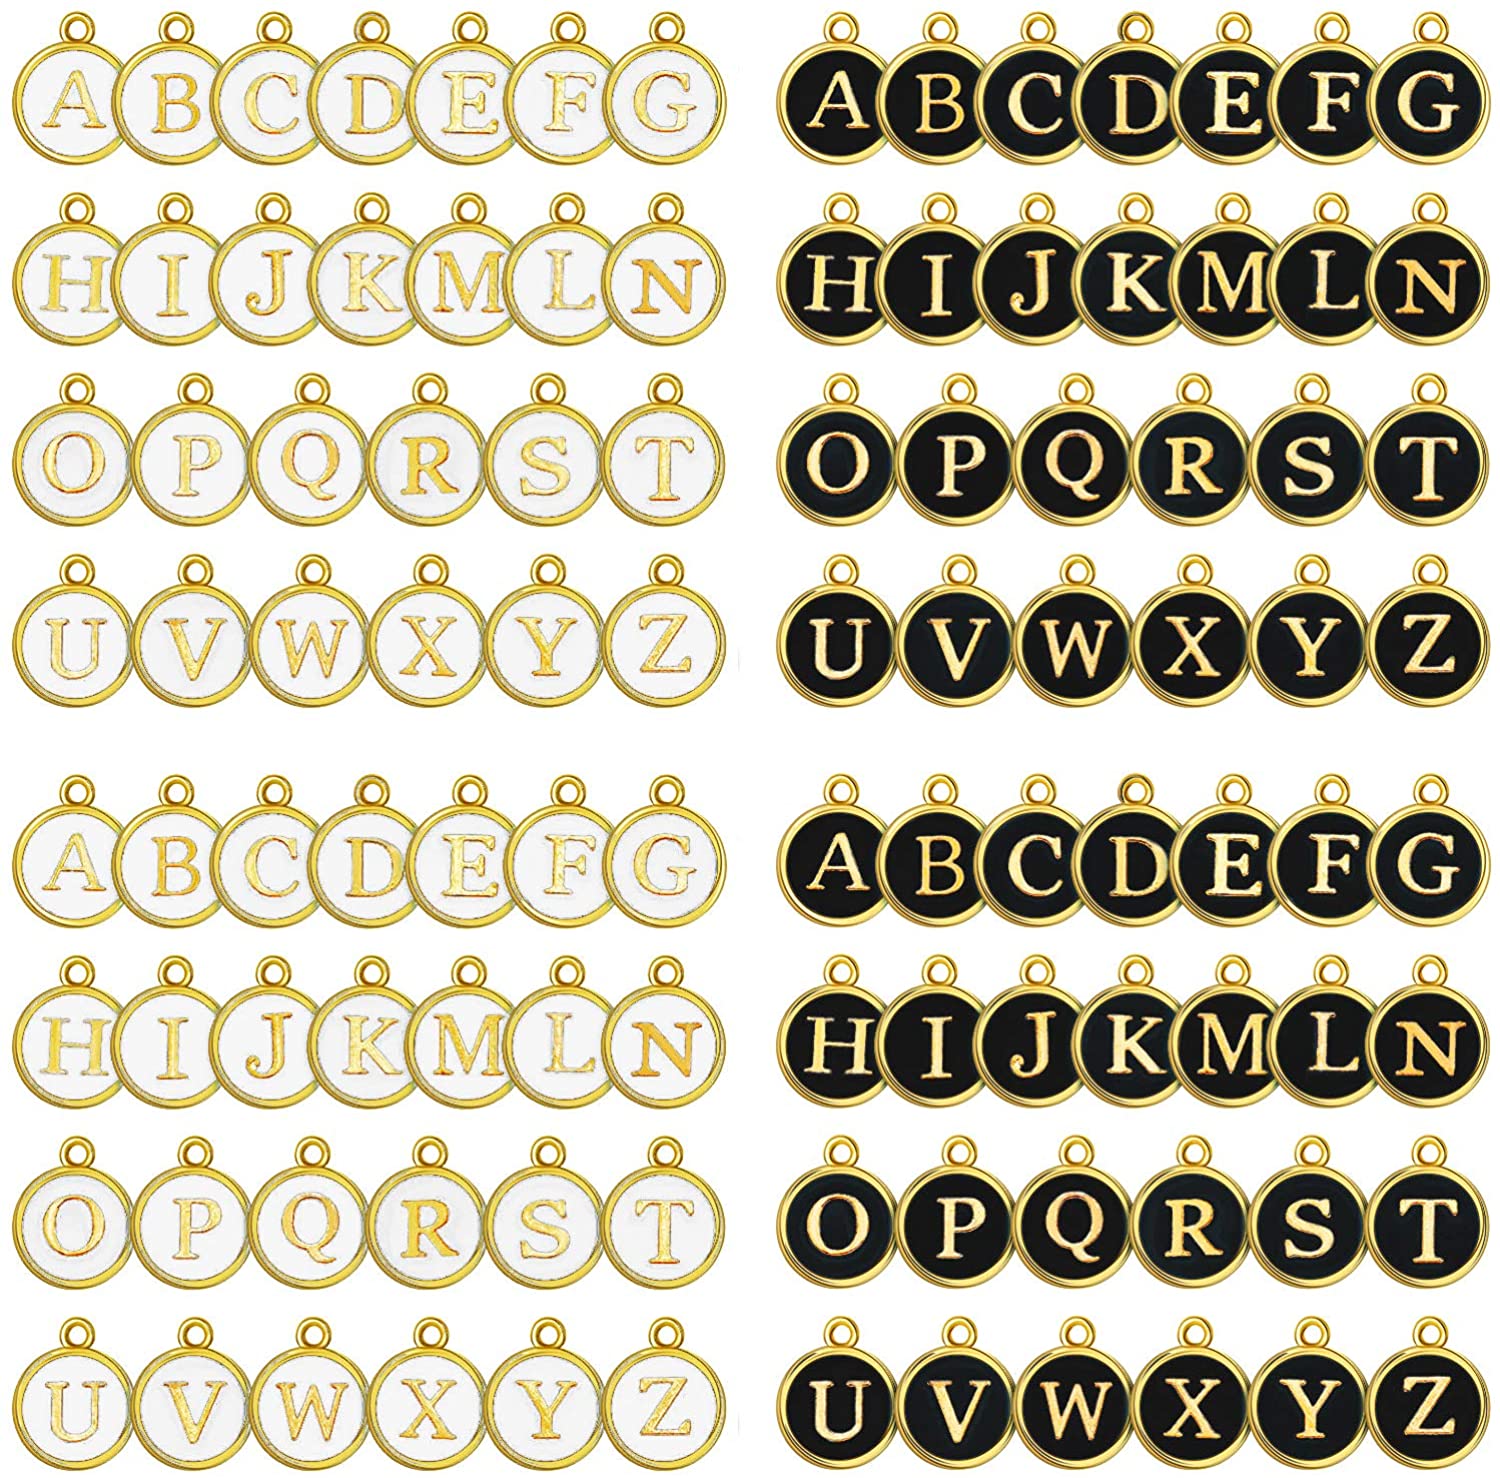 Wholesale 26 Pcs/50 Pcs Initial Letter Beads, Gold Alloy Alphabet Letter  Discs, Round Letter Charms for Jewelry Making 12mm 